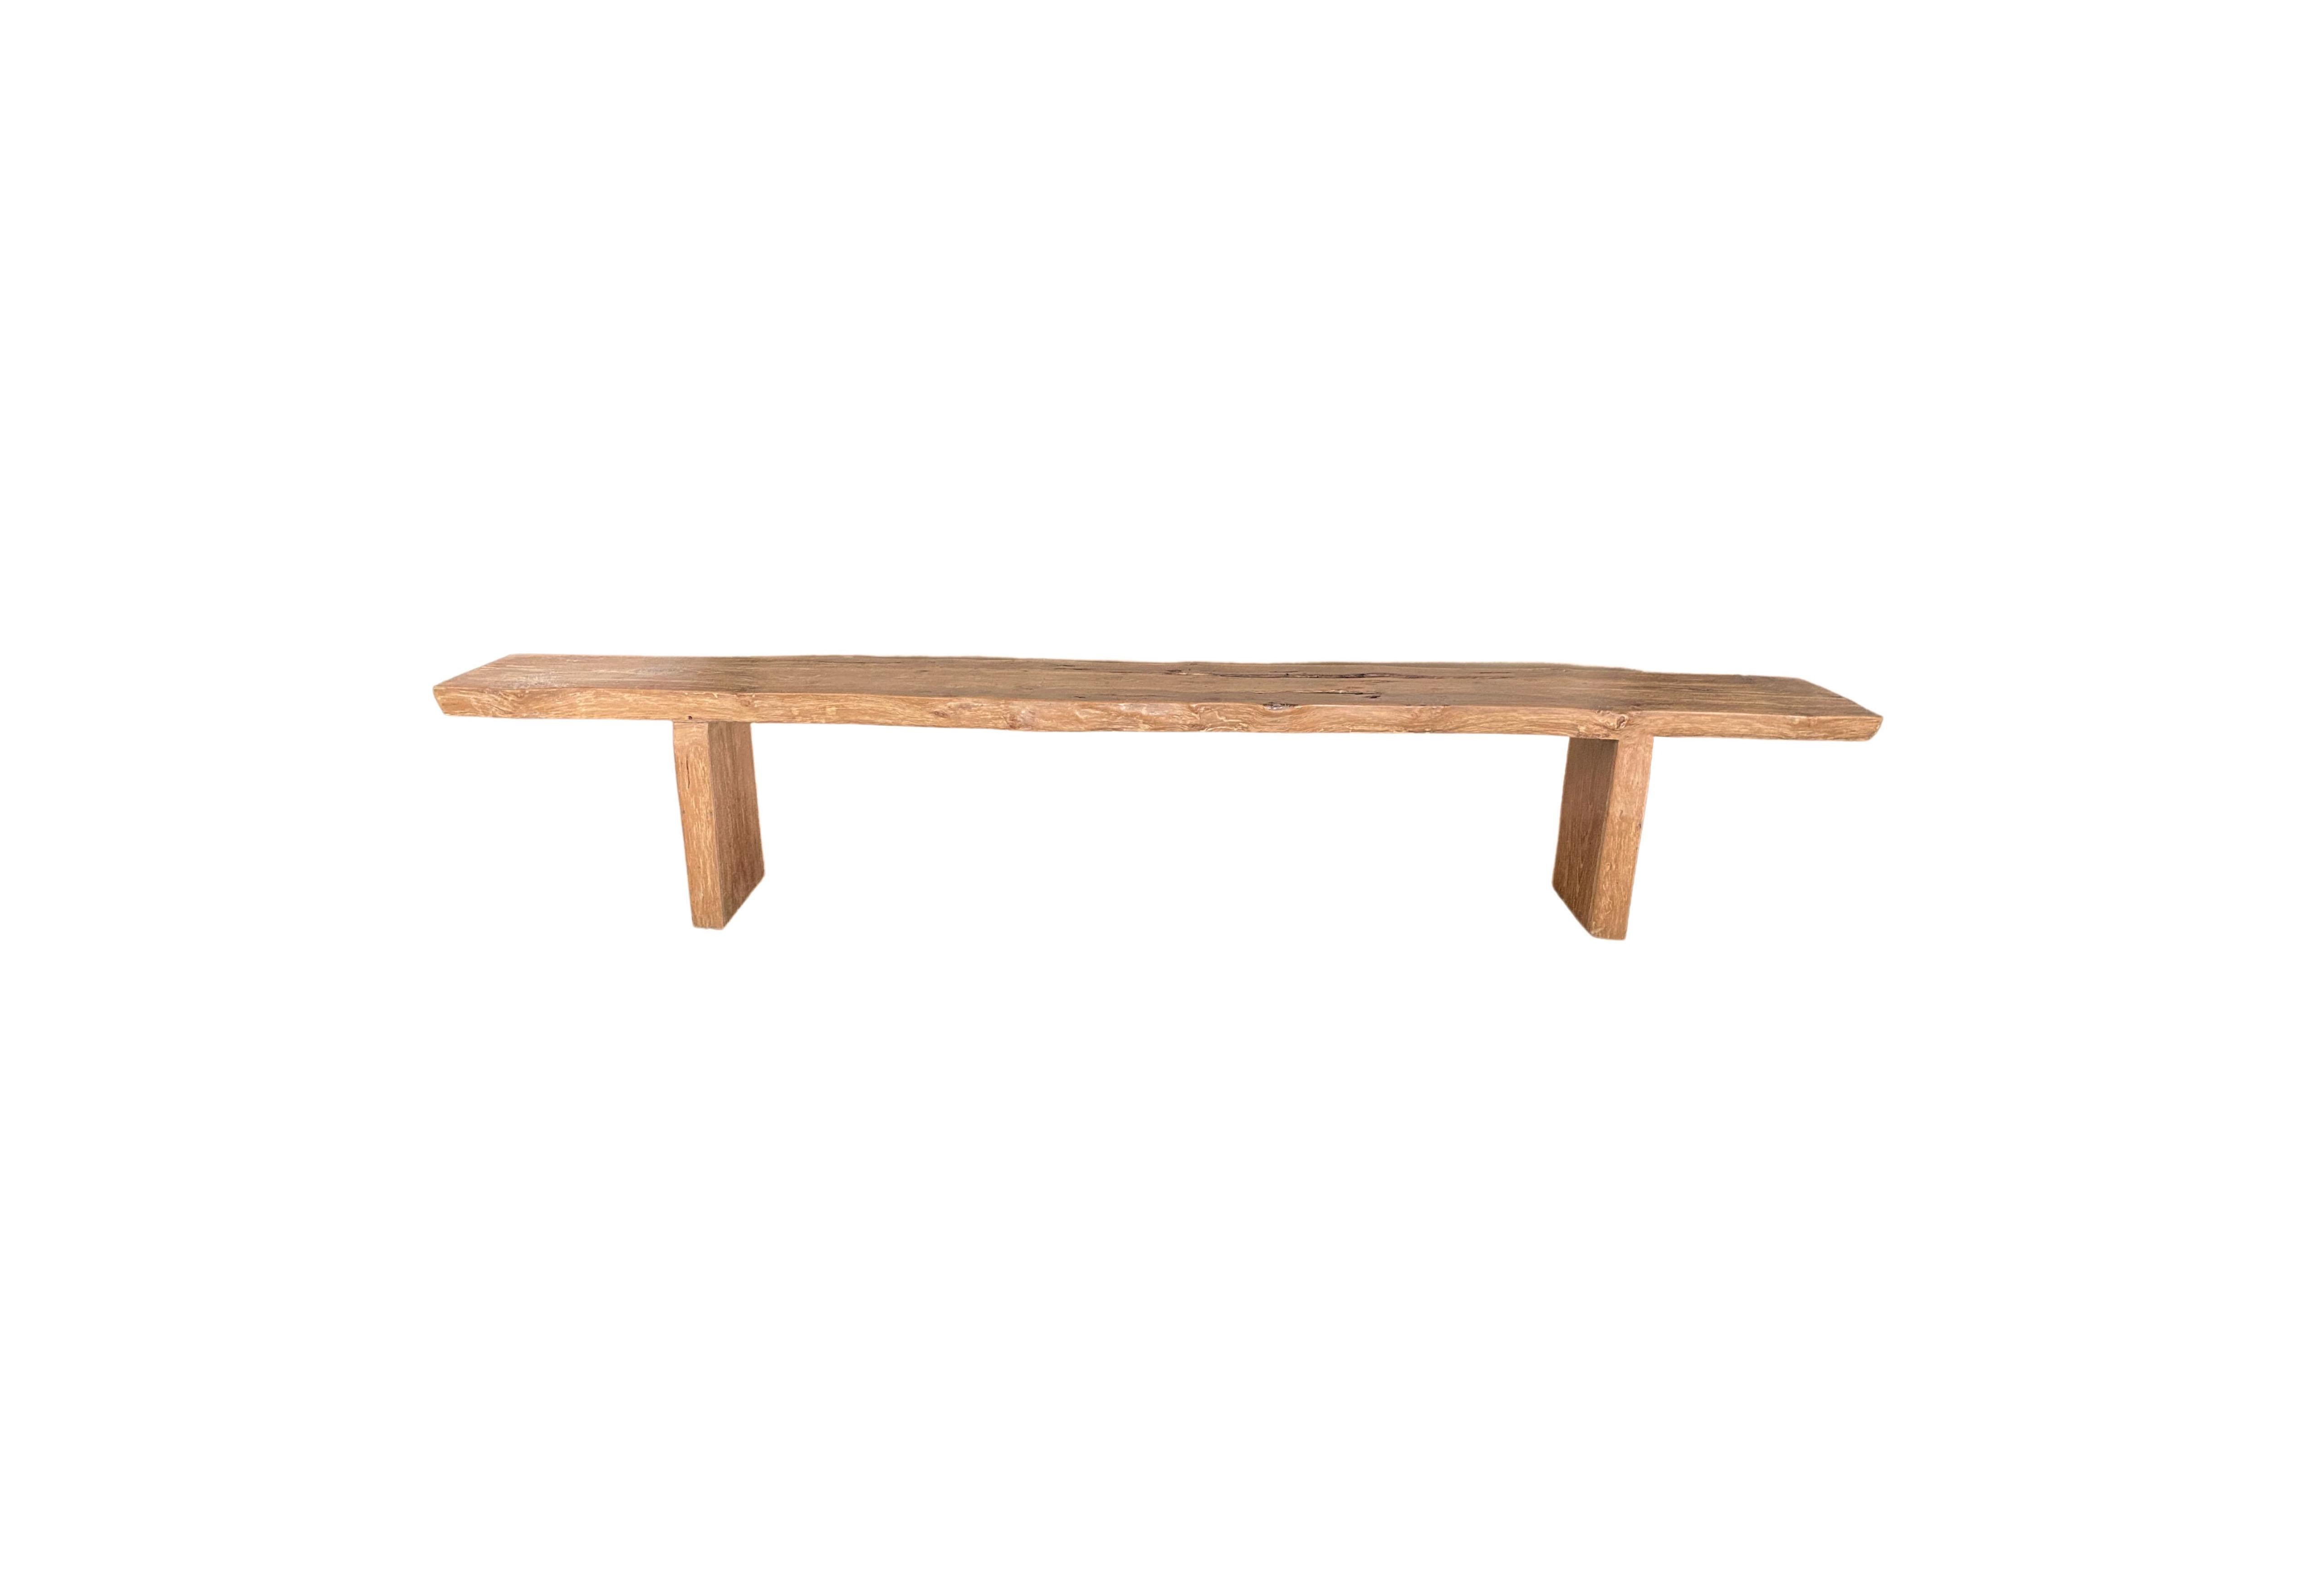 This solid teak wood bench originates from the Island of Madura, off the coast of Northeastern Java. It features a wonderful organic form with a mix of wood textures and shades. The seat was carved from a single block of teak wood and has been given